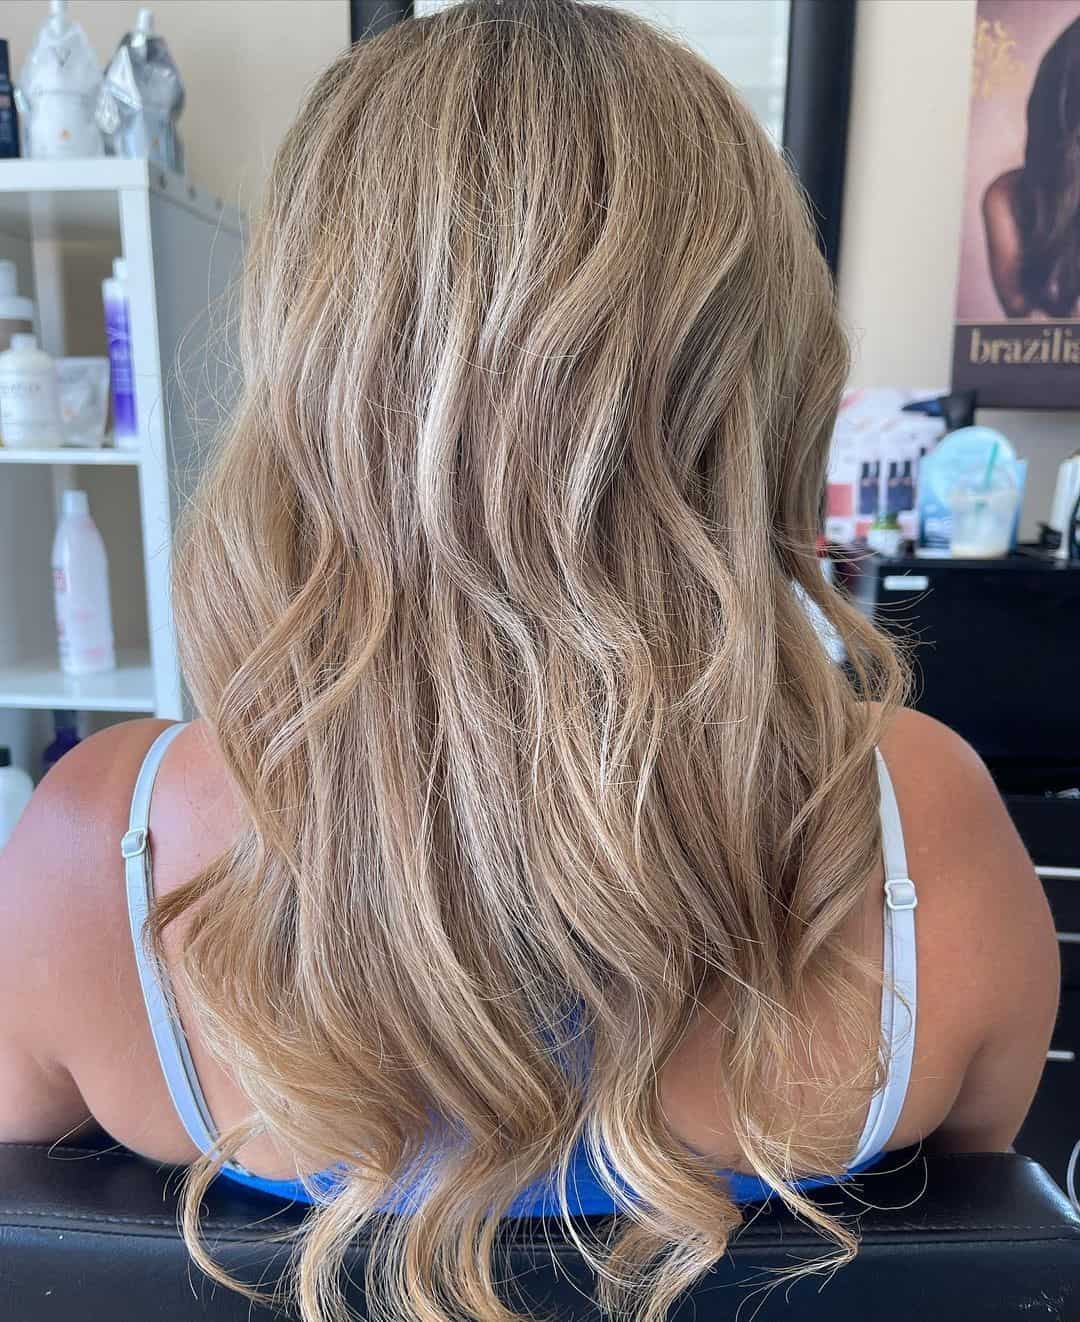 Curly Blonde Ombre Hairdo